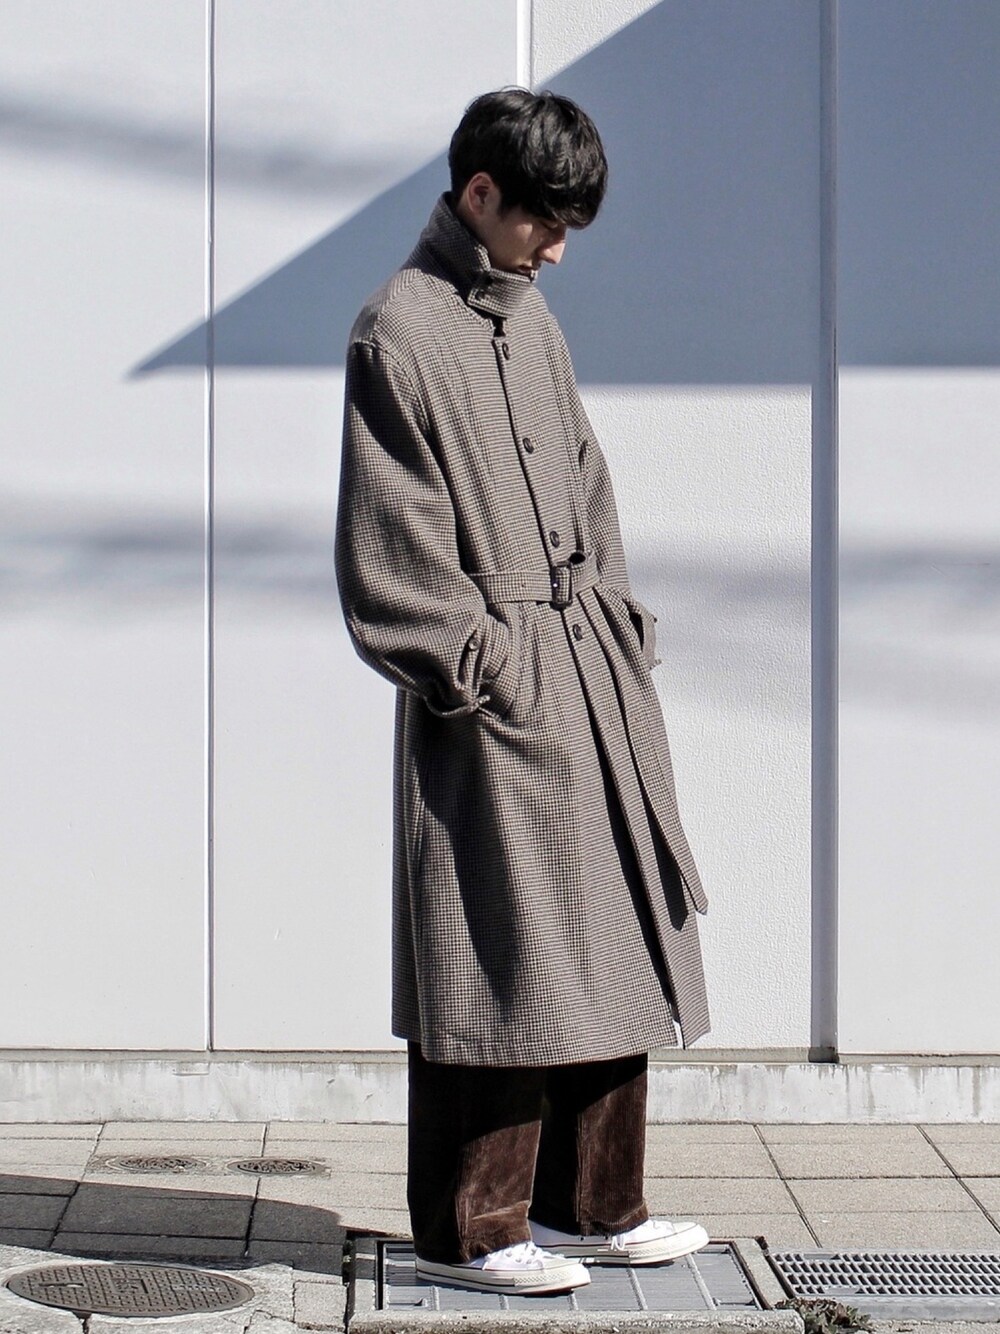 【stein】OVER SLEEVE INVESTIGATED COAT